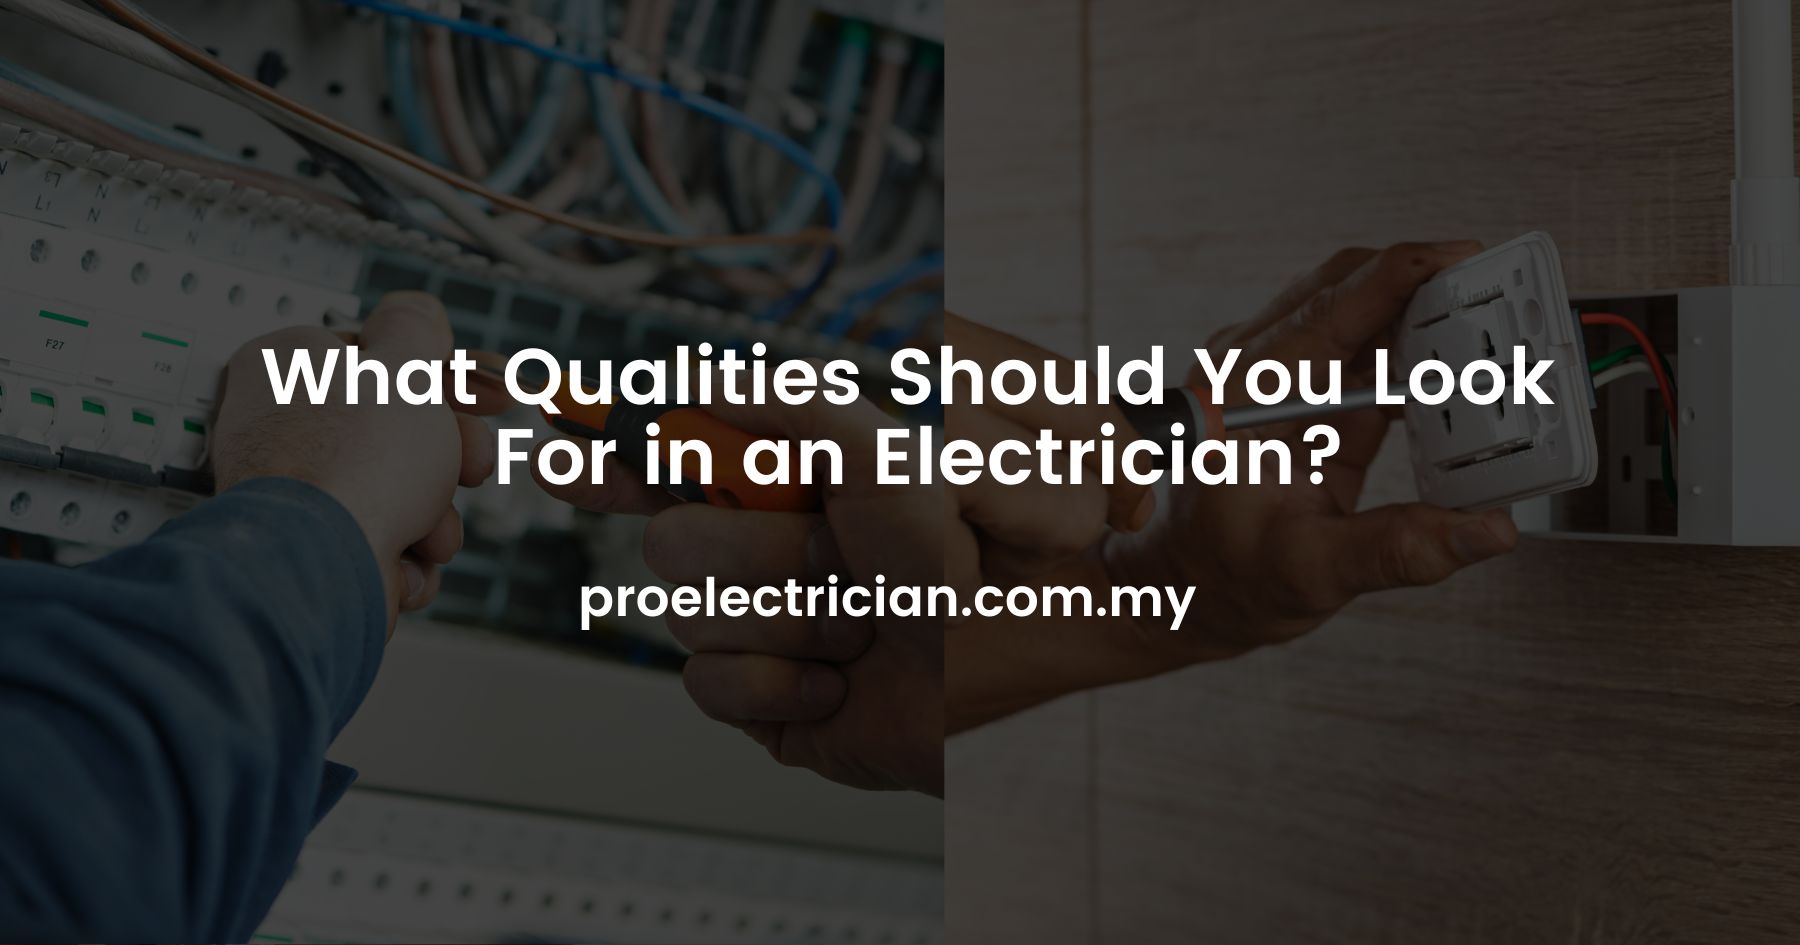 What Qualities Should You Look For in an Electrician?